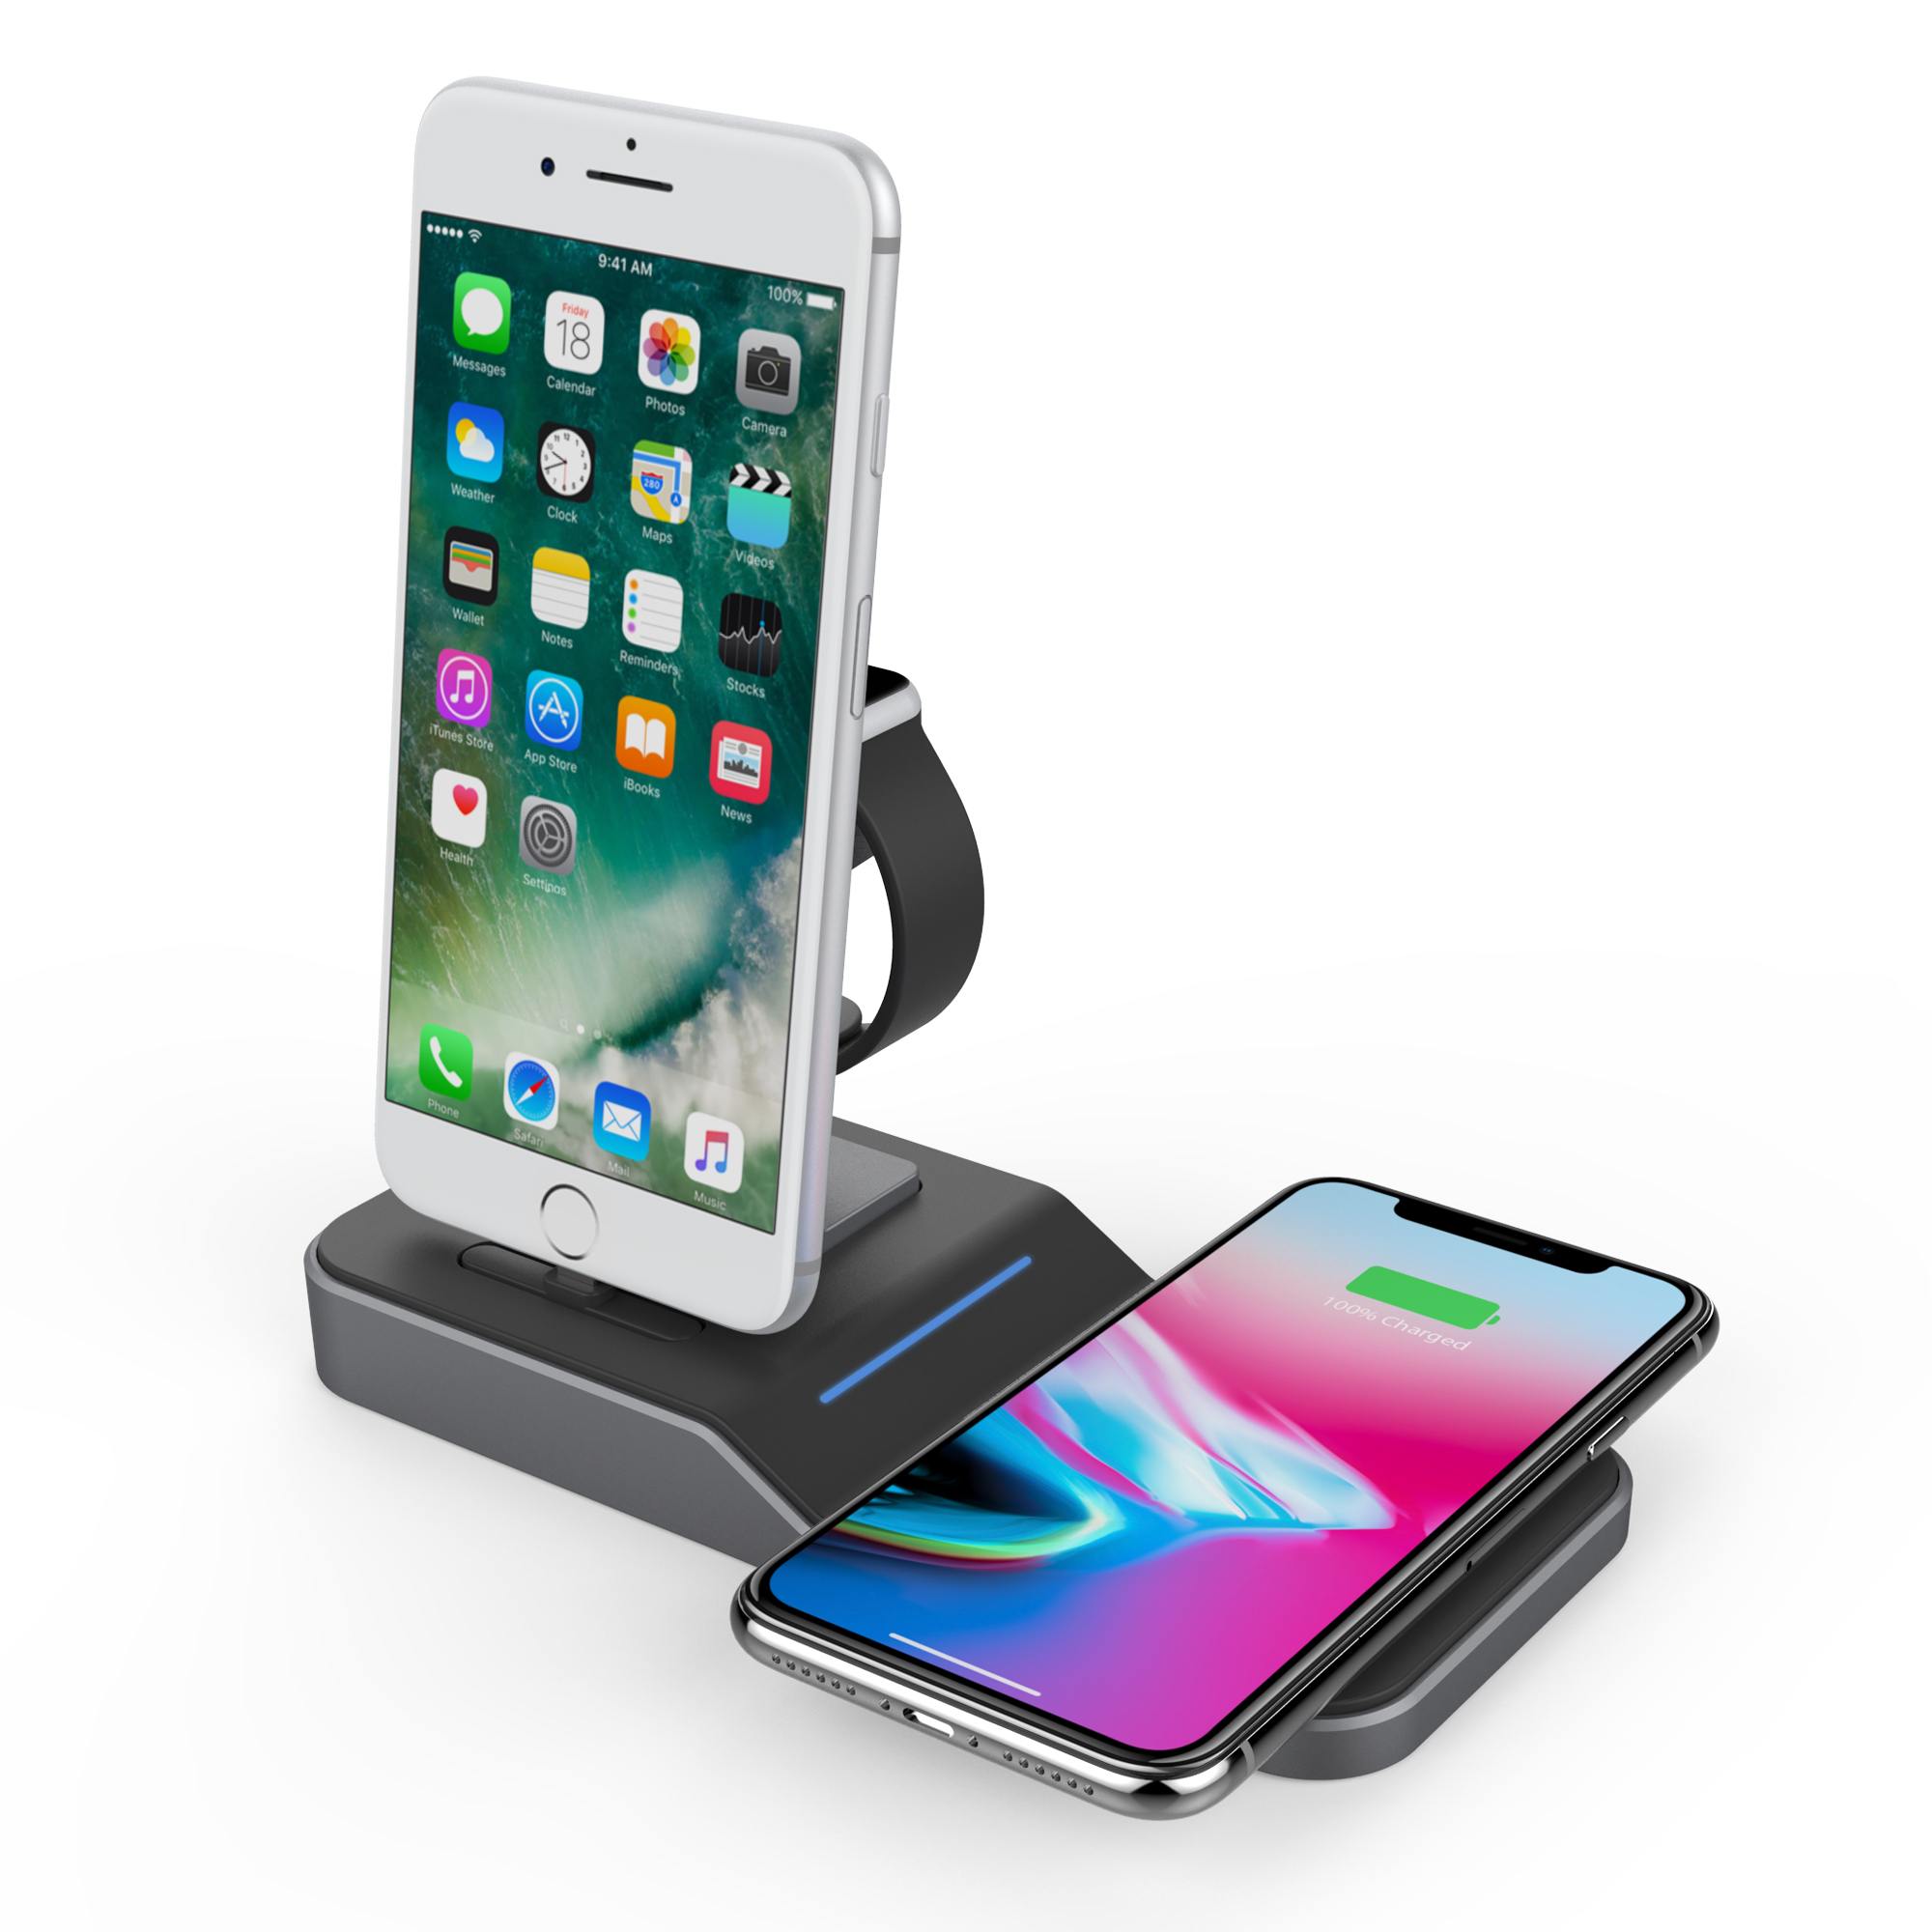 Wireless Charging Station for iPhone, Apple Watch and AirPods Pro